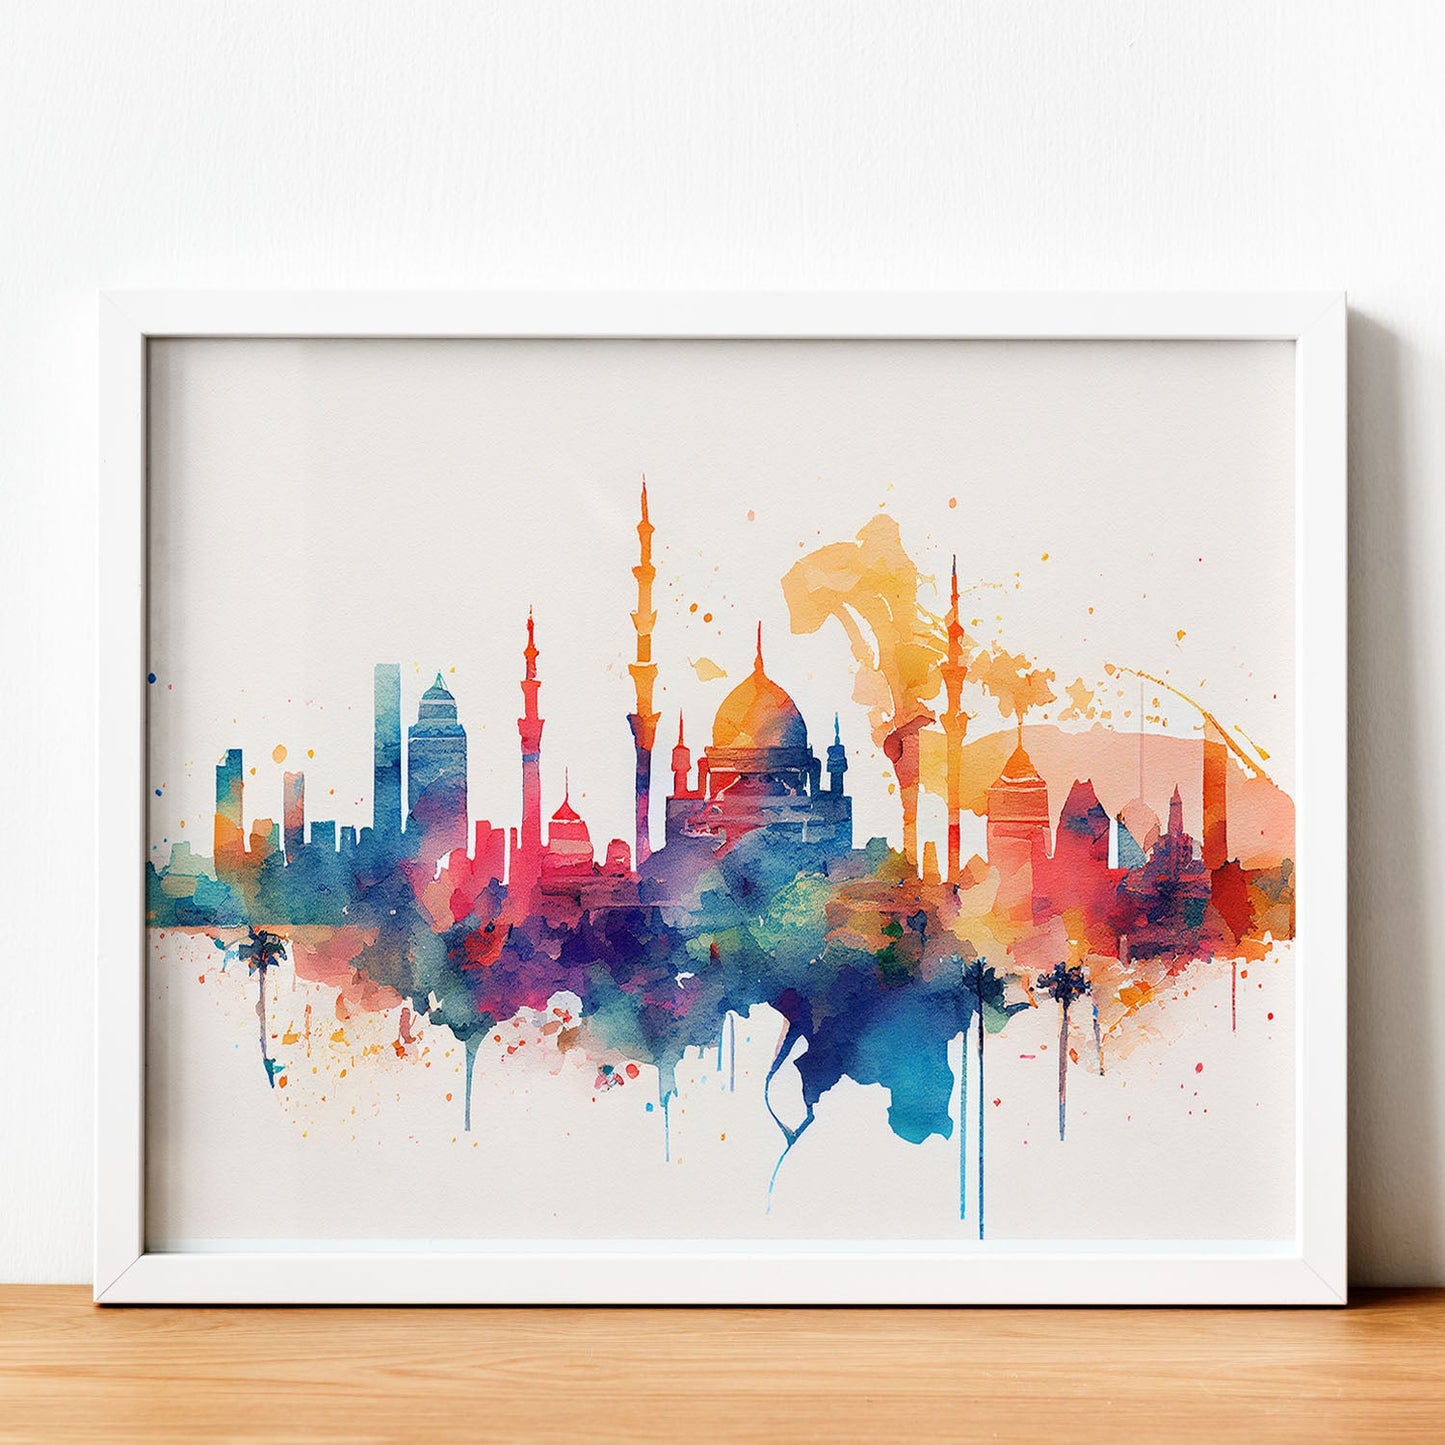 Nacnic watercolor of a skyline of the city of Cairo. Aesthetic Wall Art Prints for Bedroom or Living Room Design.-Artwork-Nacnic-A4-Sin Marco-Nacnic Estudio SL